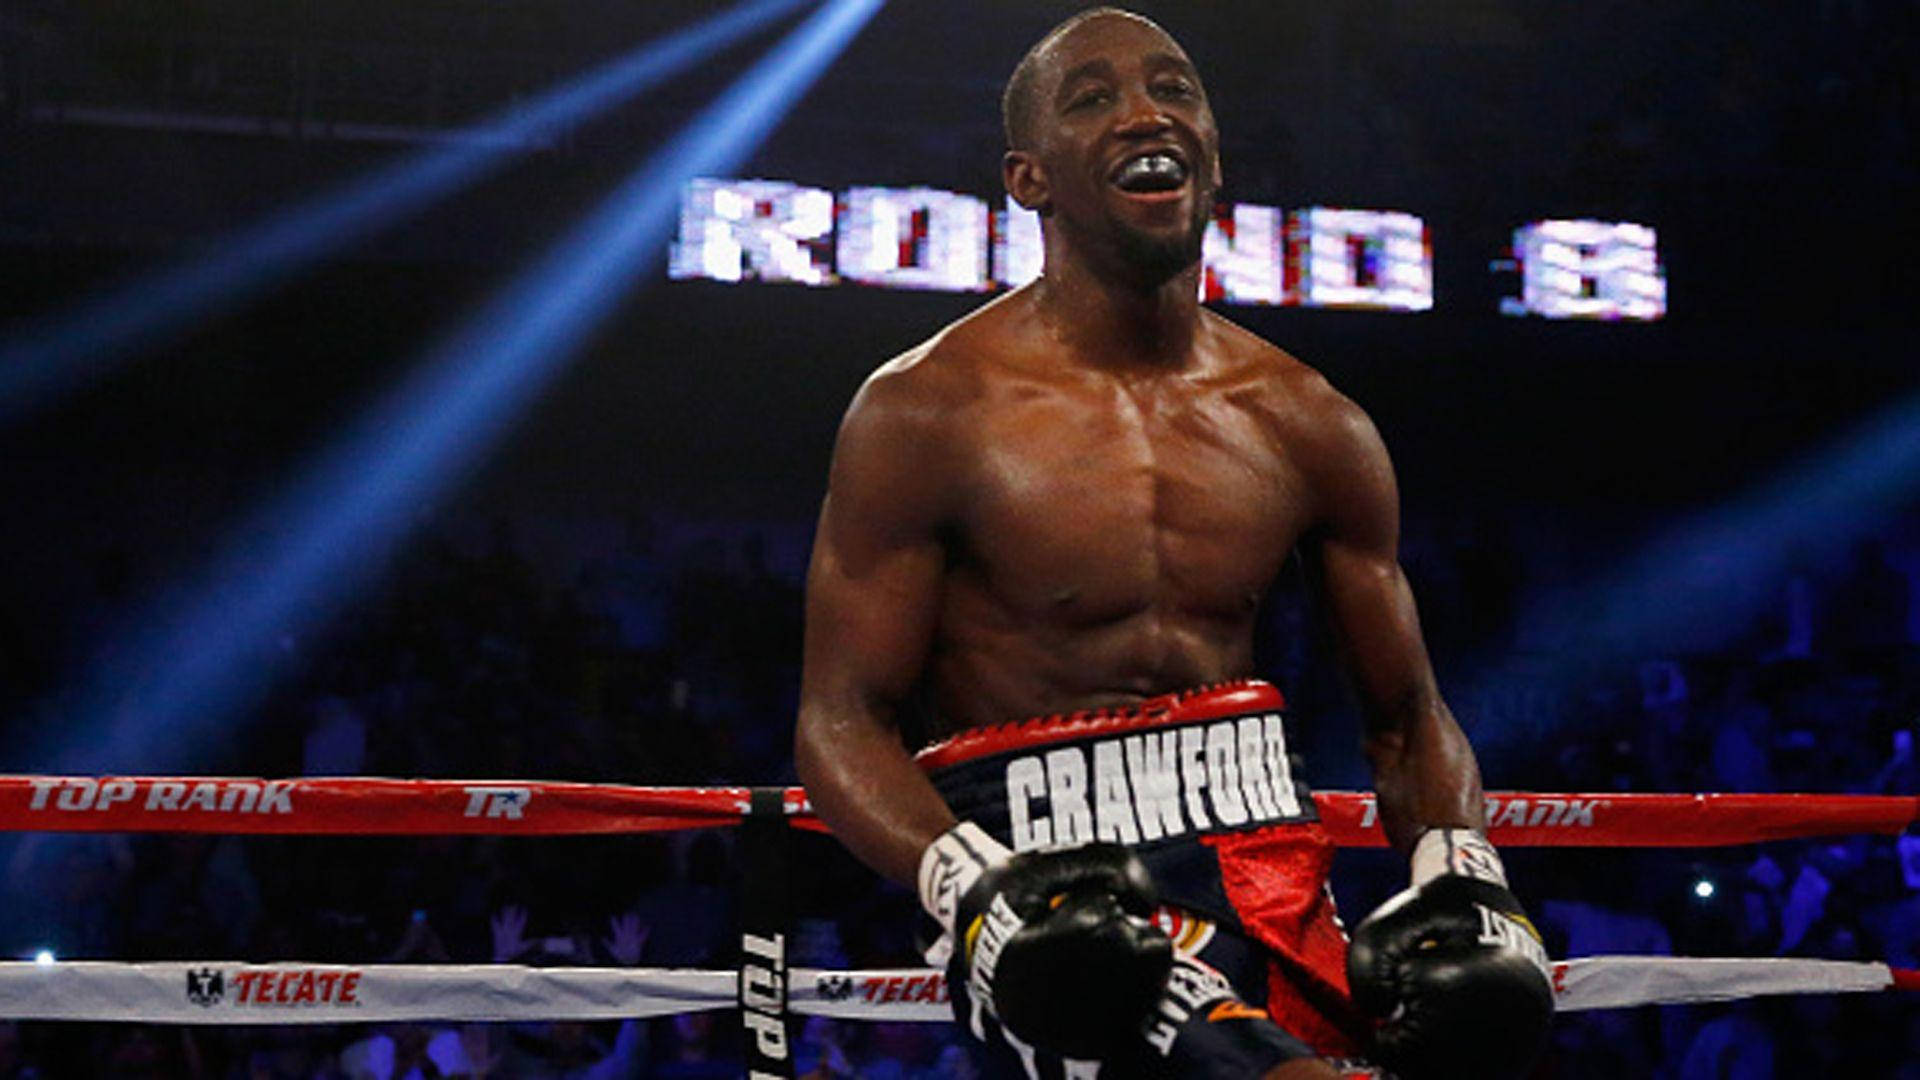 Terence Crawford lands a powerful punch during Round 8 Wallpaper